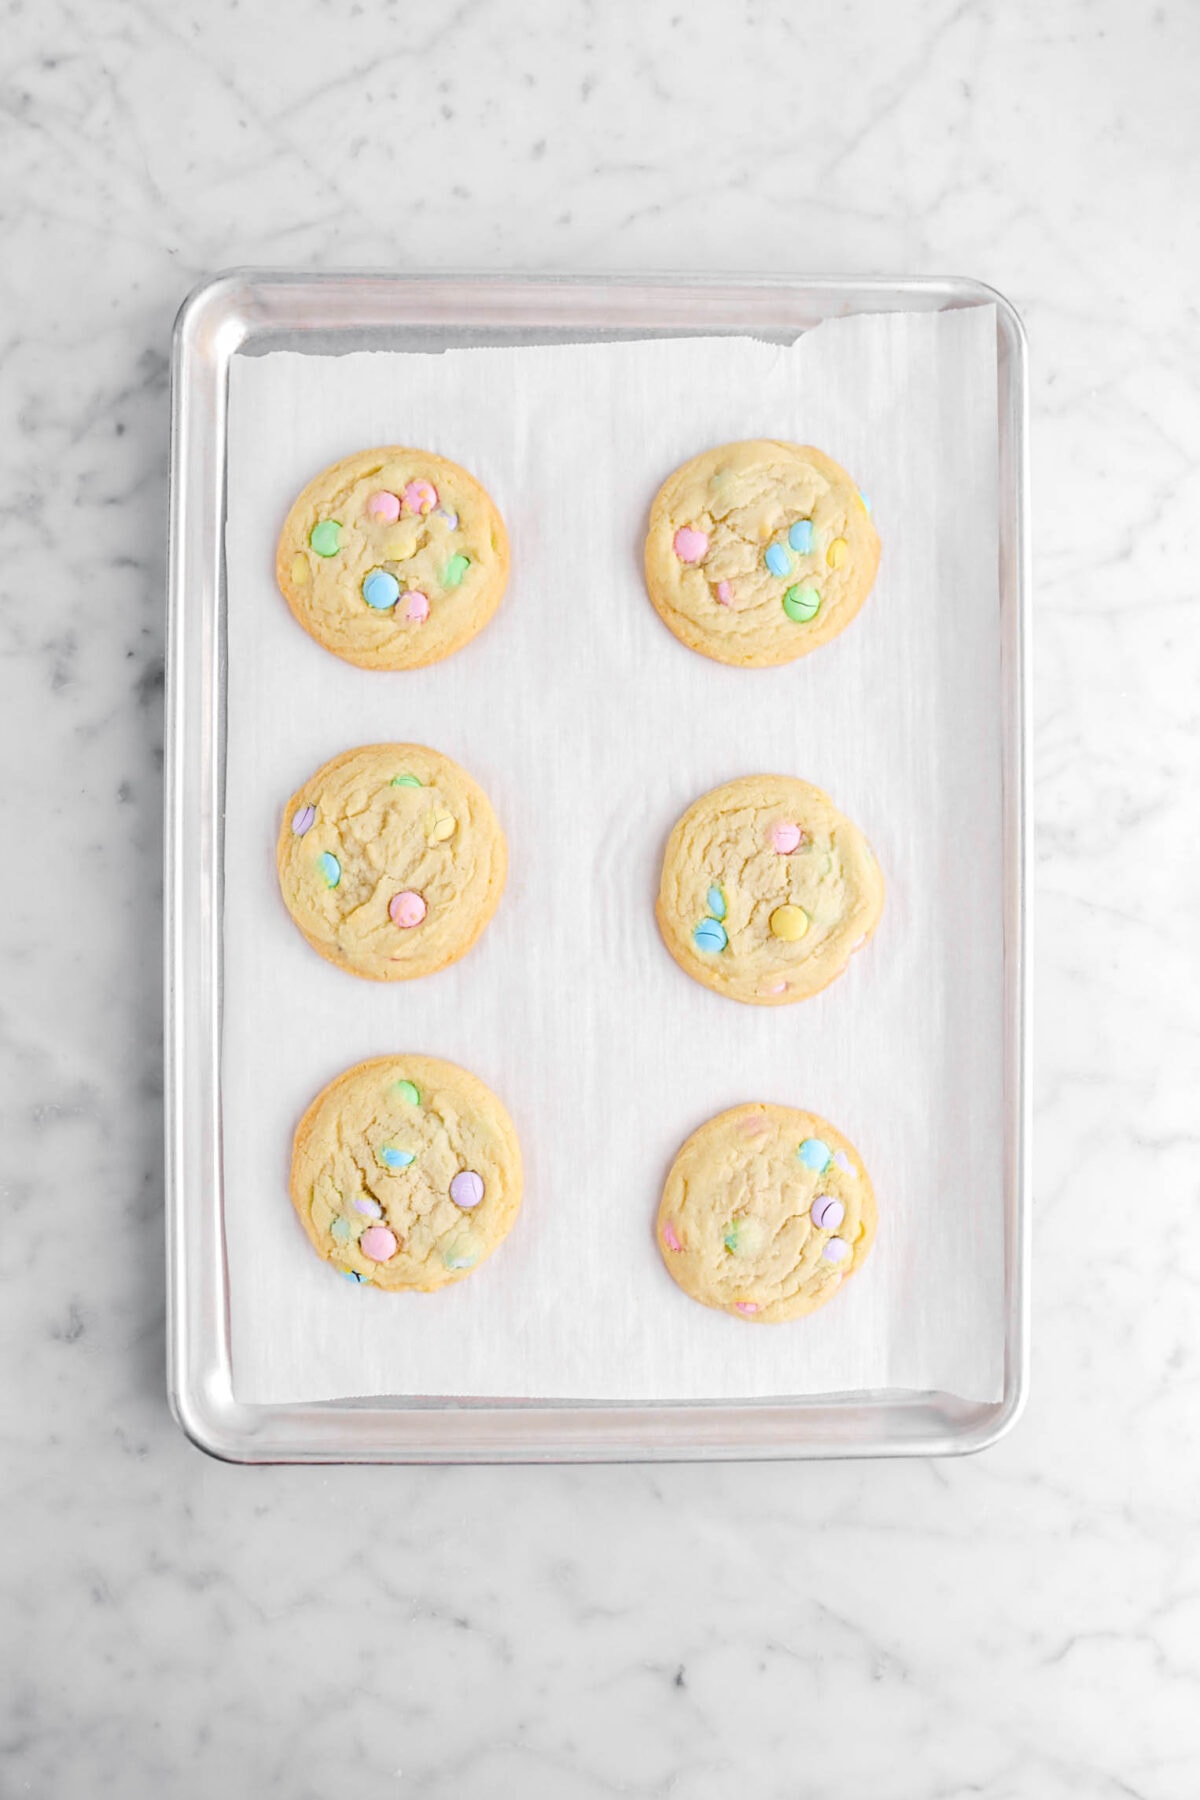 six baked M&M sugar cookies on lined sheet pan.